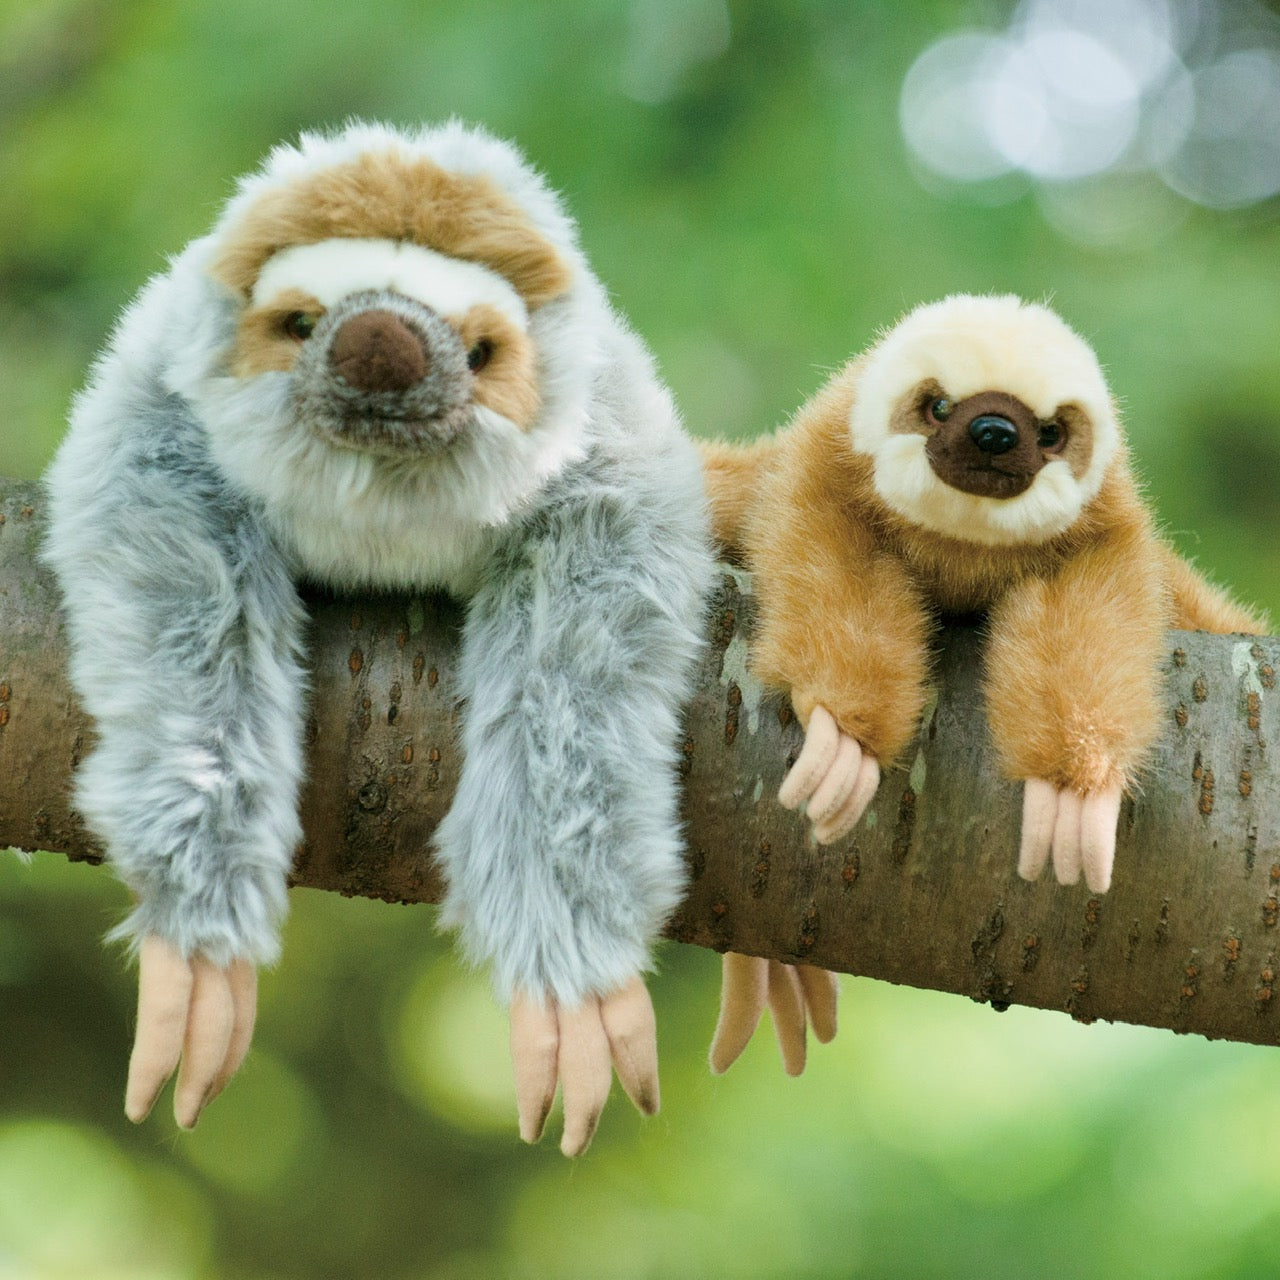 X 63133 BABY SLOTH PLUSH-DISCONTINUED